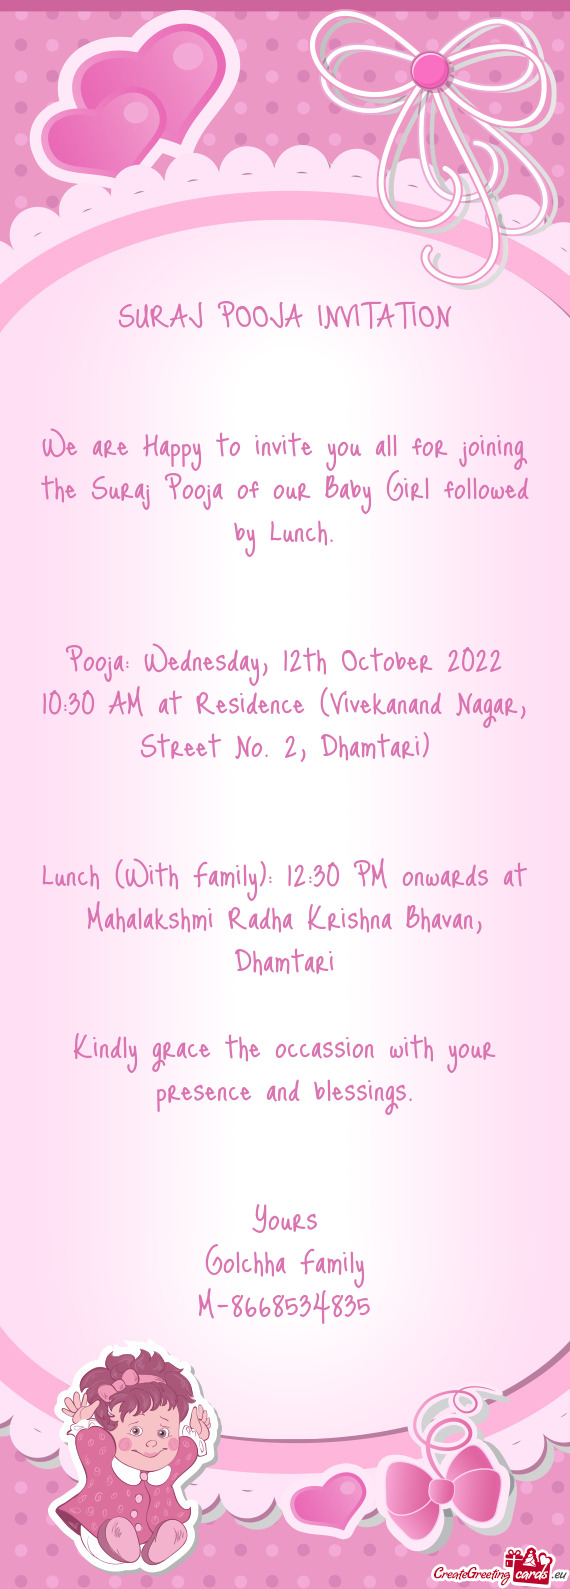 We are Happy to invite you all for joining the Suraj Pooja of our Baby Girl followed by Lunch